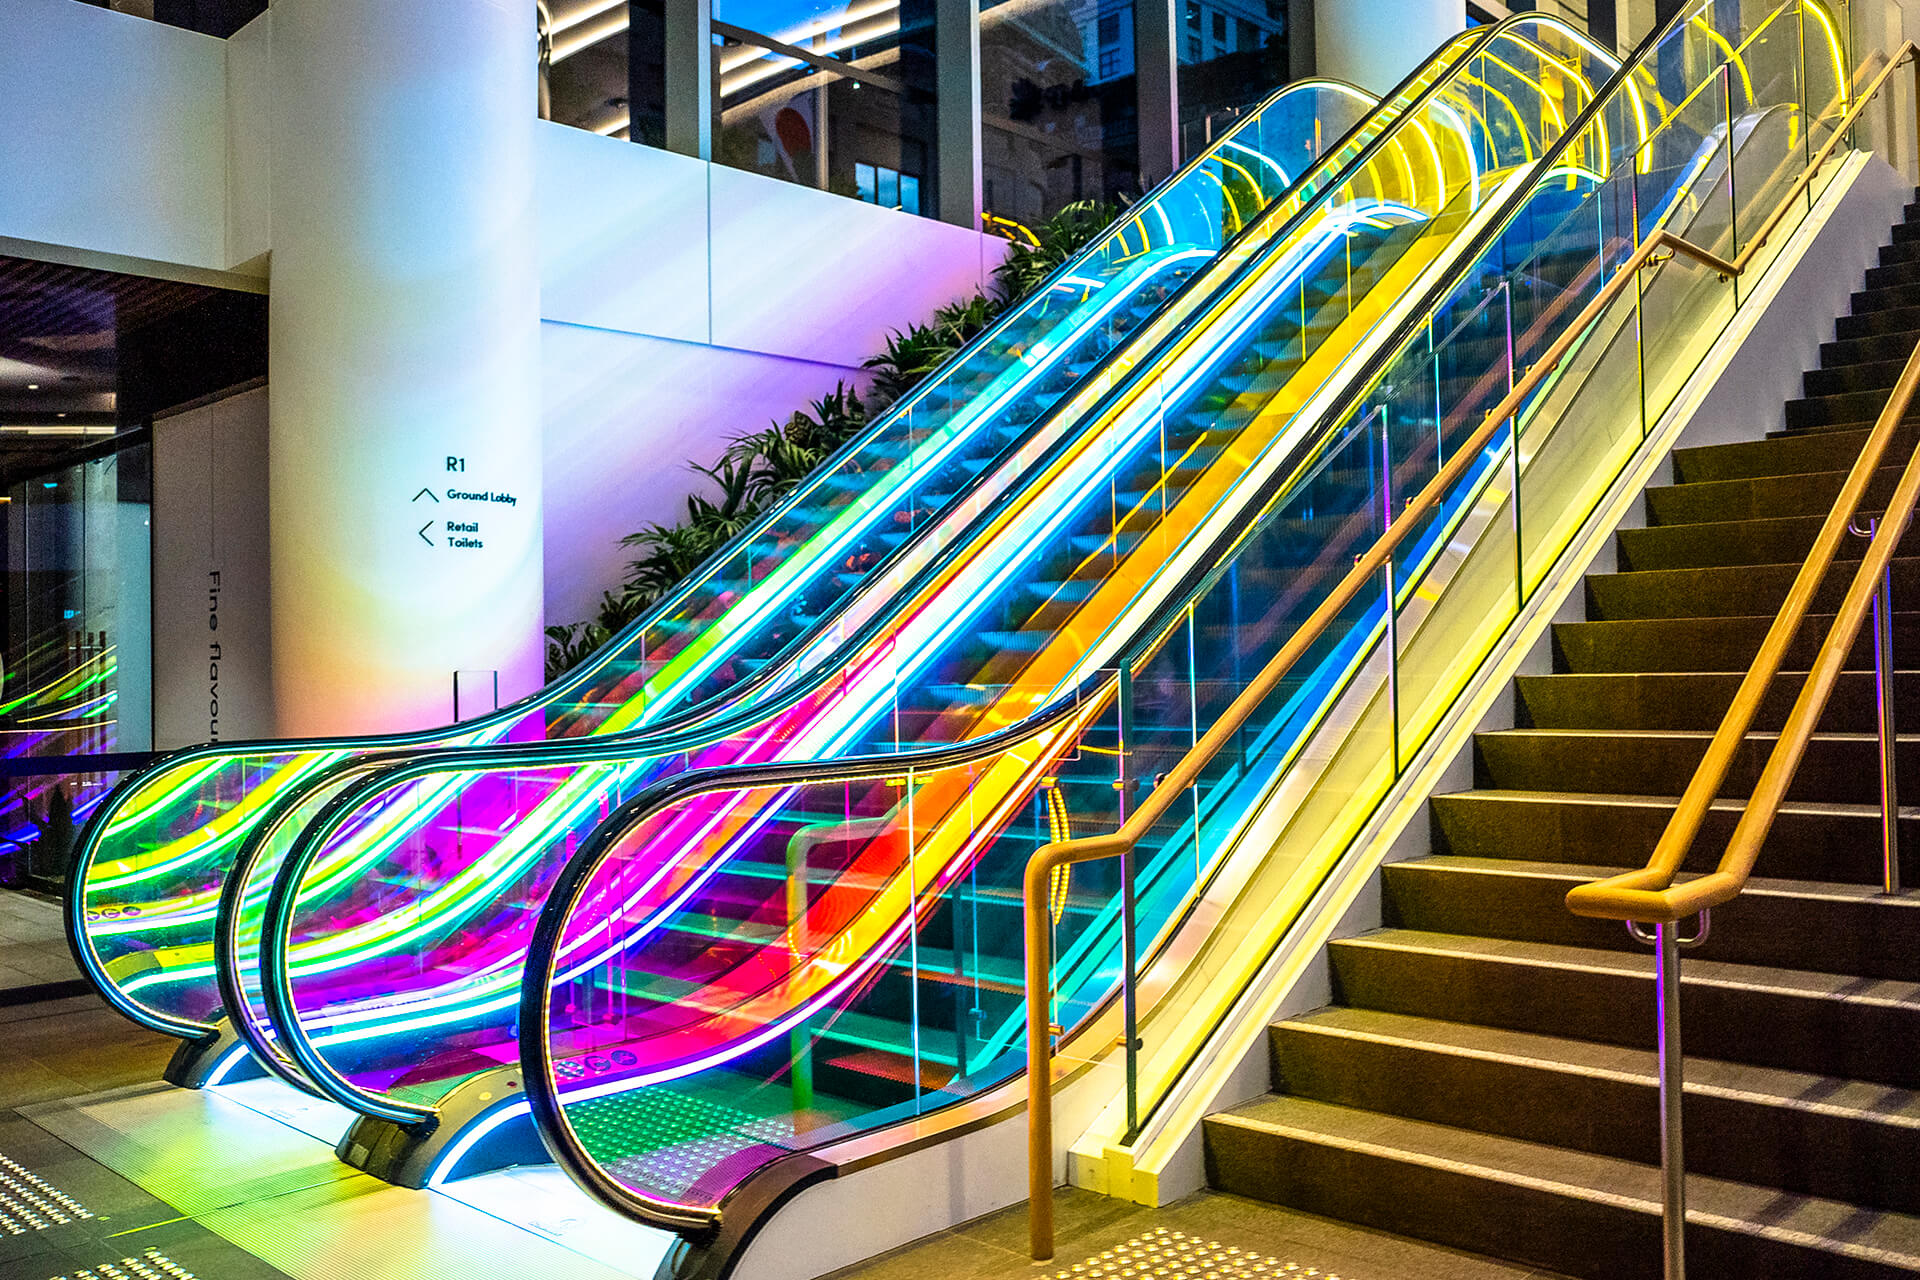 VANDAL Experiential Christmas Campaign for Dexus in the commercial lobby of 50 Bridge Street, Sydney showing dichroic film on escalators and artistic dichroic baubles.